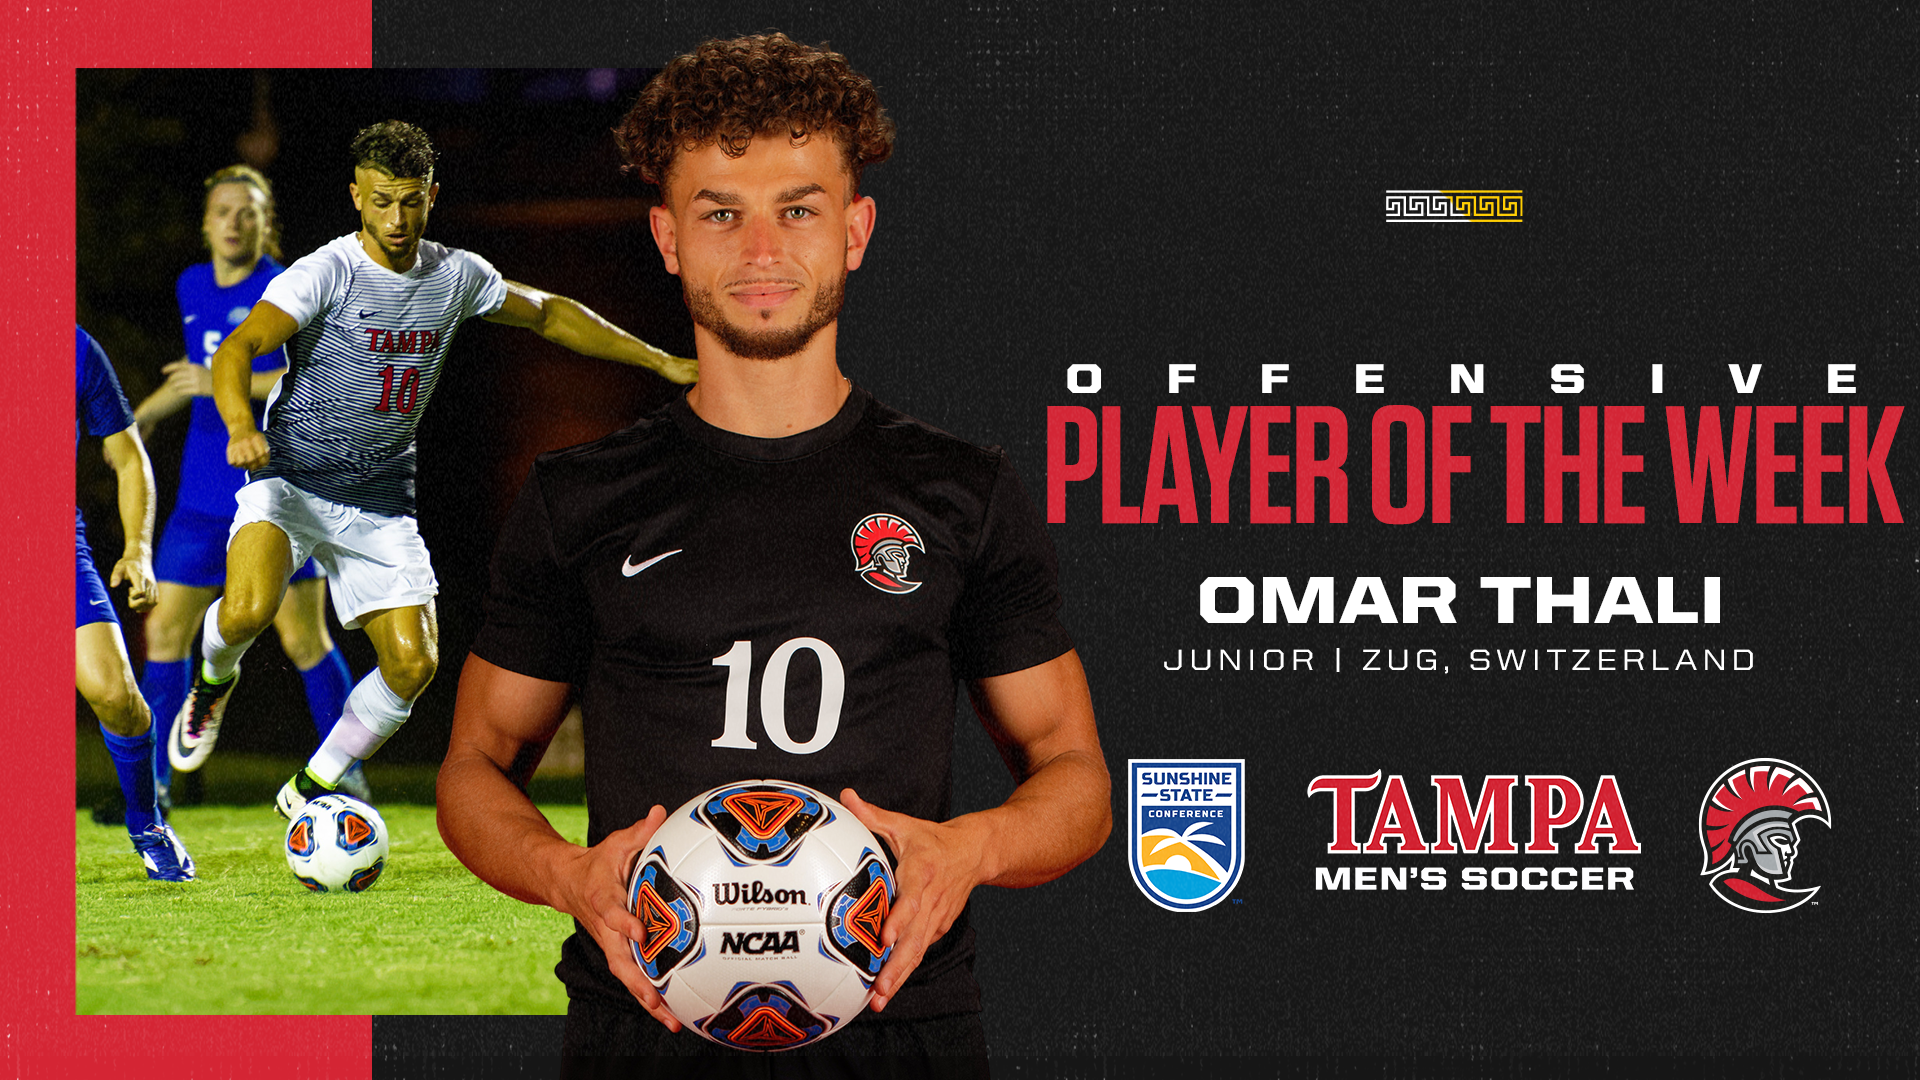 SSC Offensive Player of the Week Omar Thali